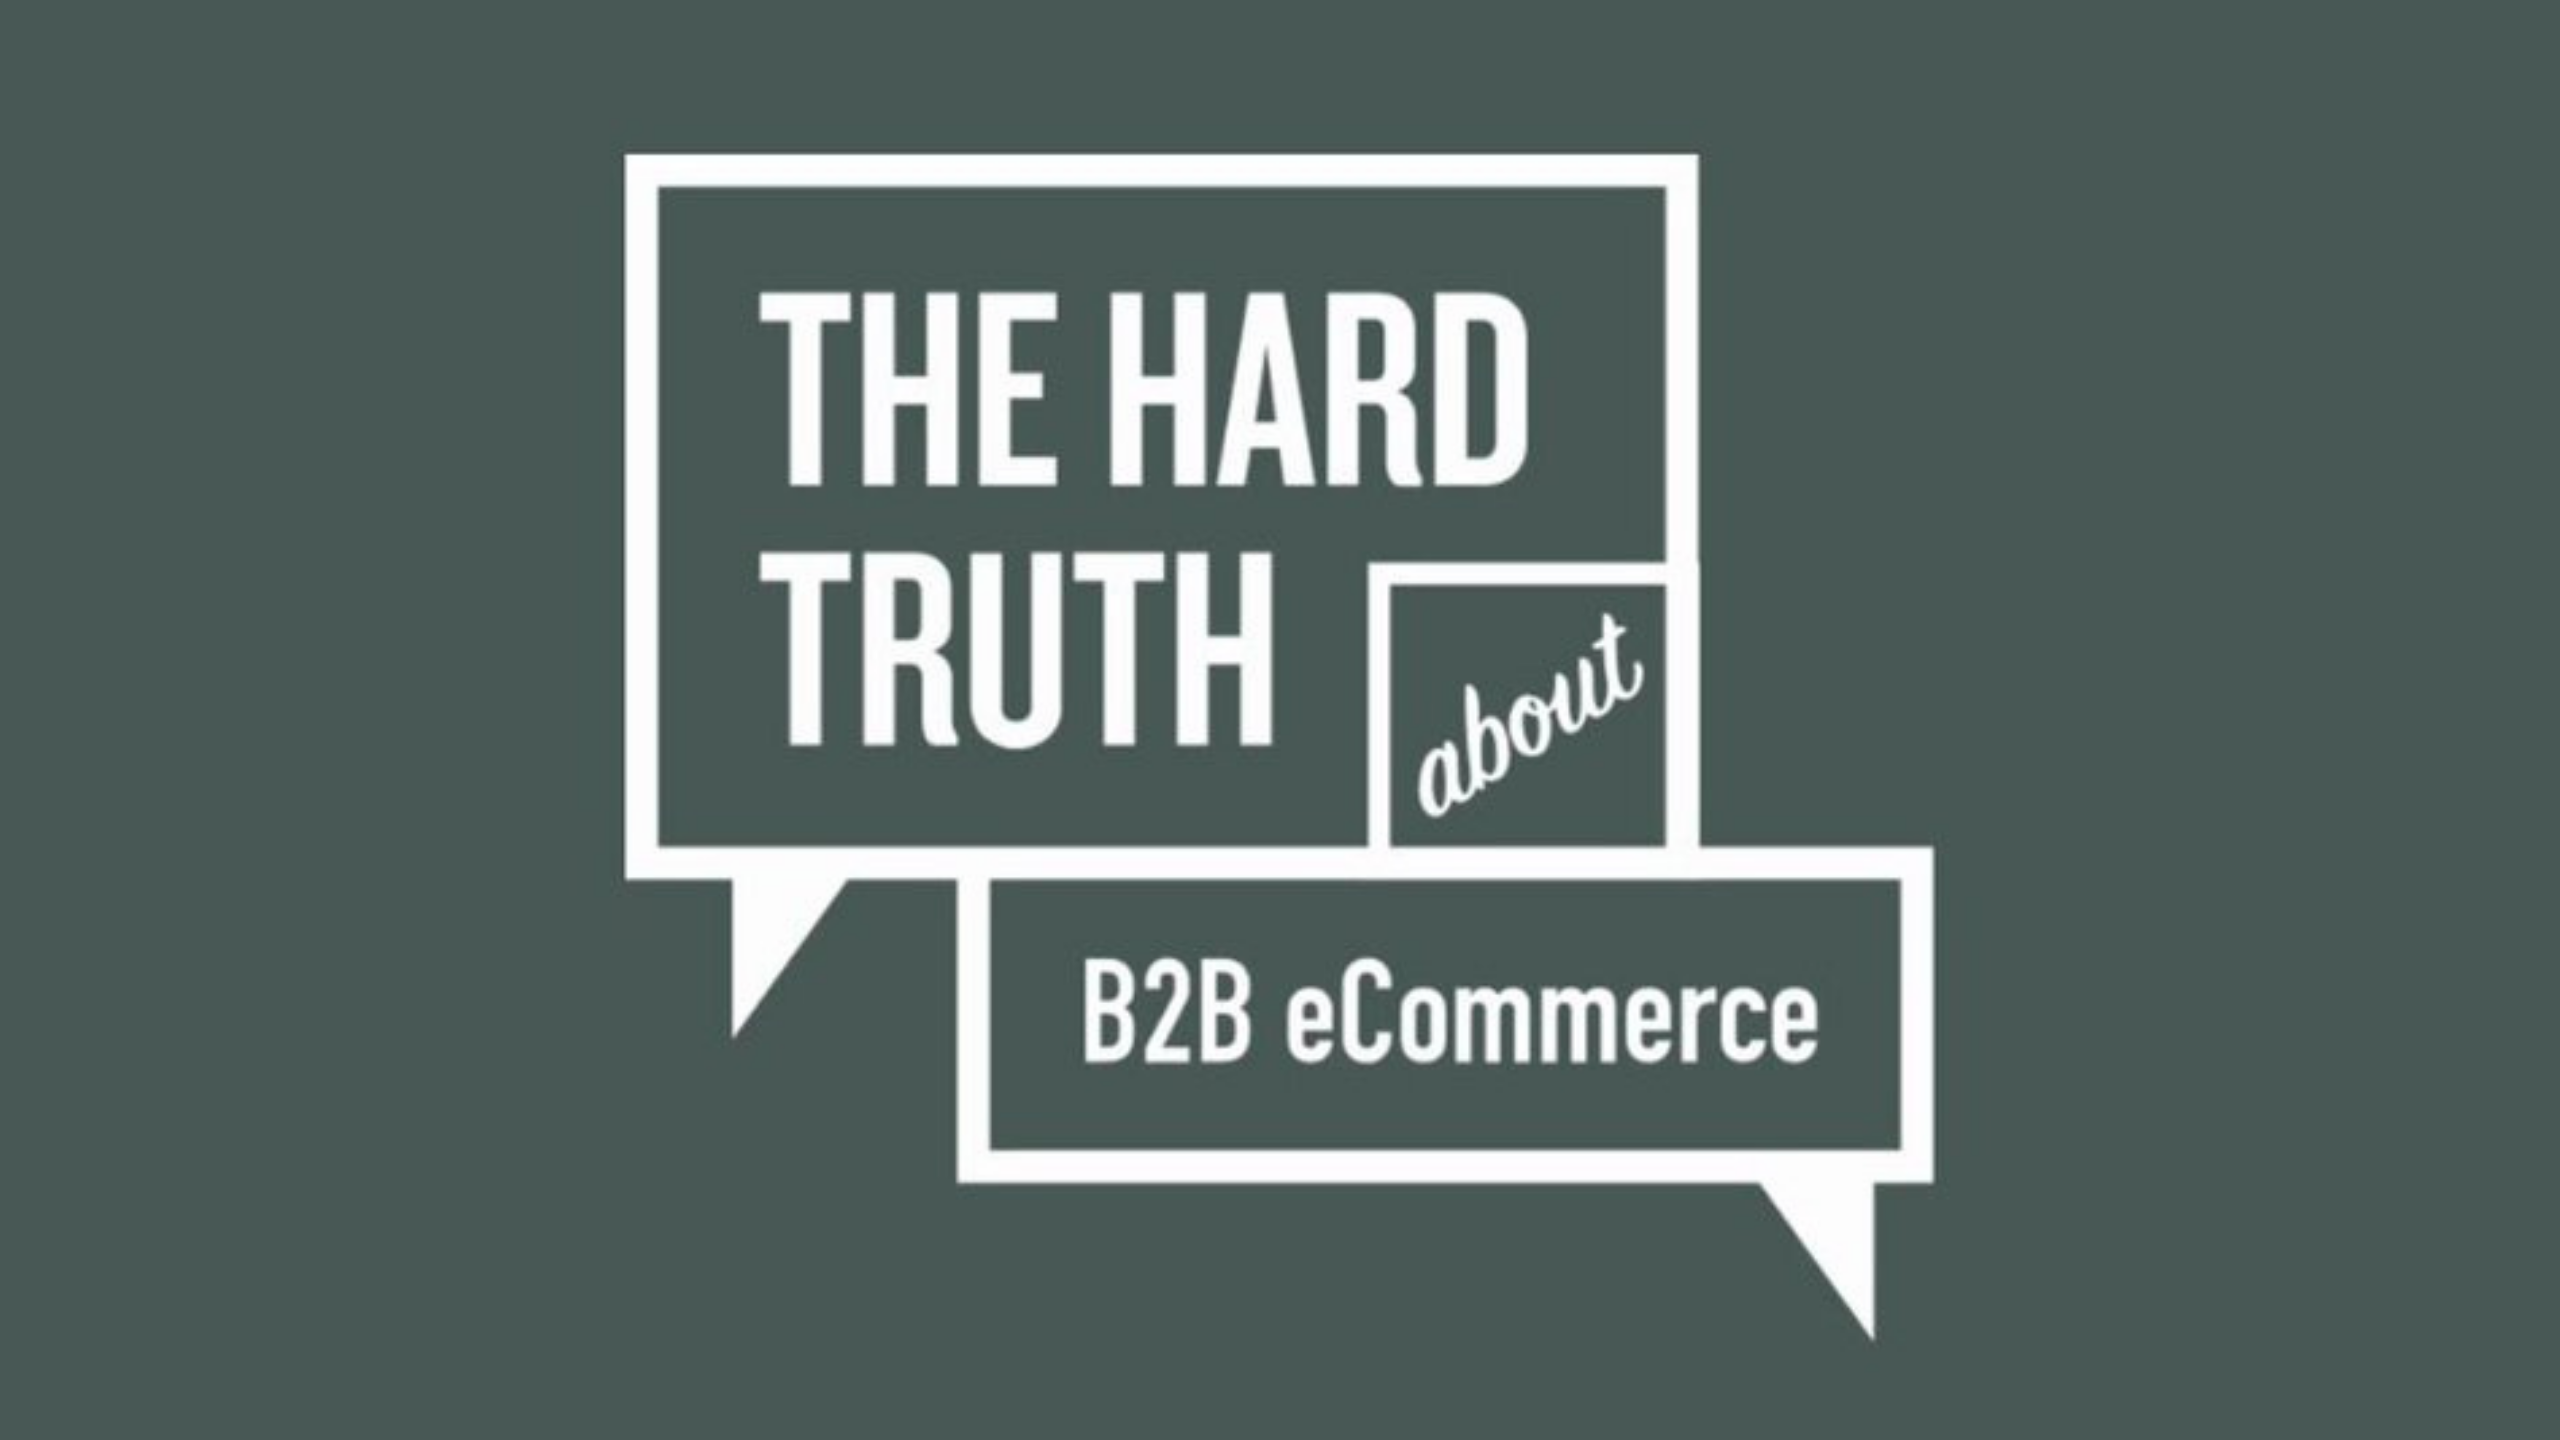 Text on a grey background reads "THE HARD TRUTH about B2B eCommerce" with each part of the text inside white speech bubbles. The word "about" is written in a smaller bubble that overlaps with the larger bubble containing the rest of the text.